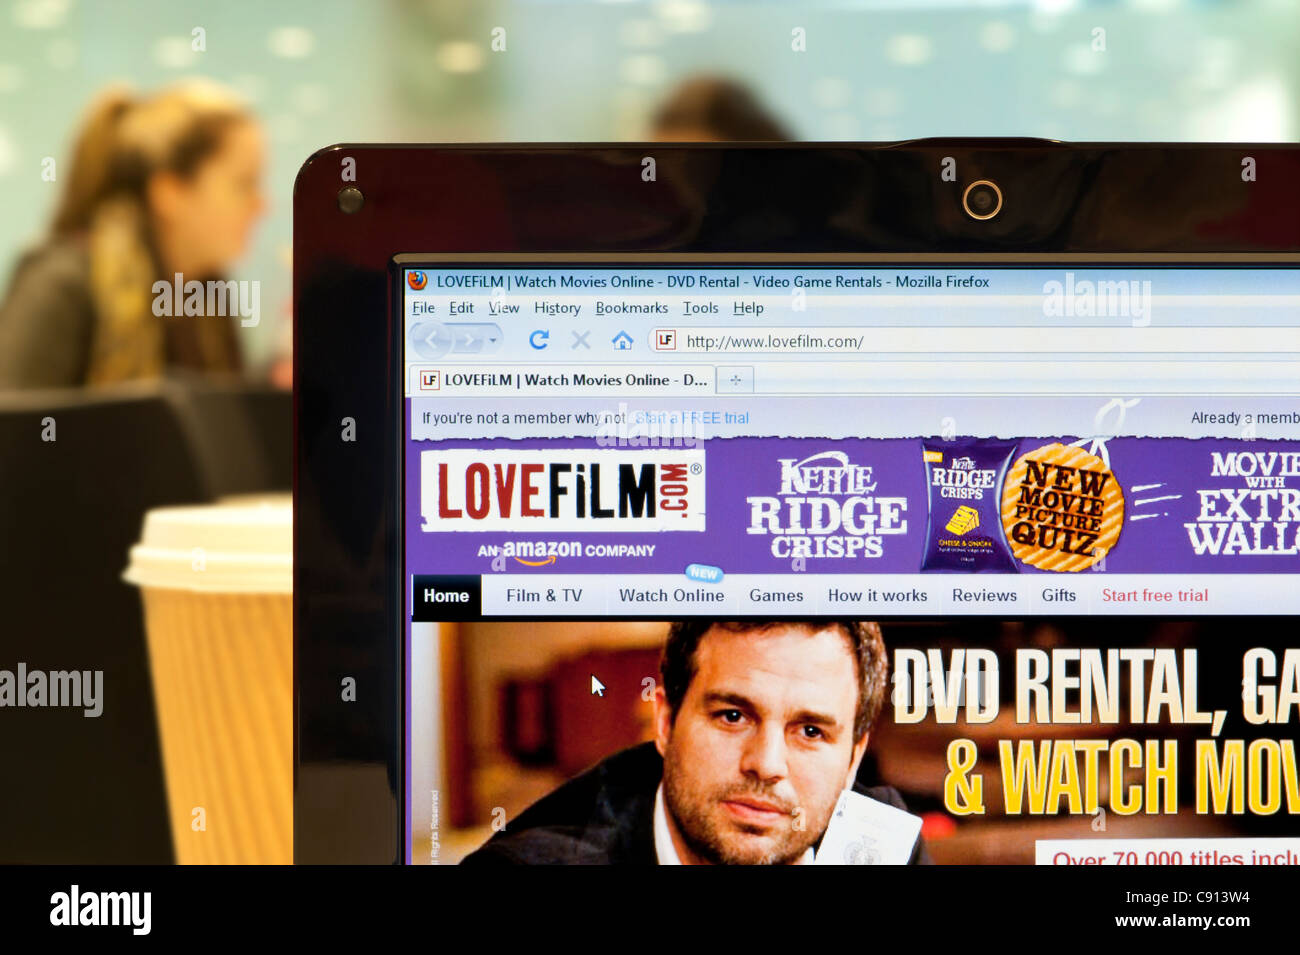 The LoveFilm website shot in a coffee shop environment (Editorial use only: print, TV, e-book and editorial website). Stock Photo